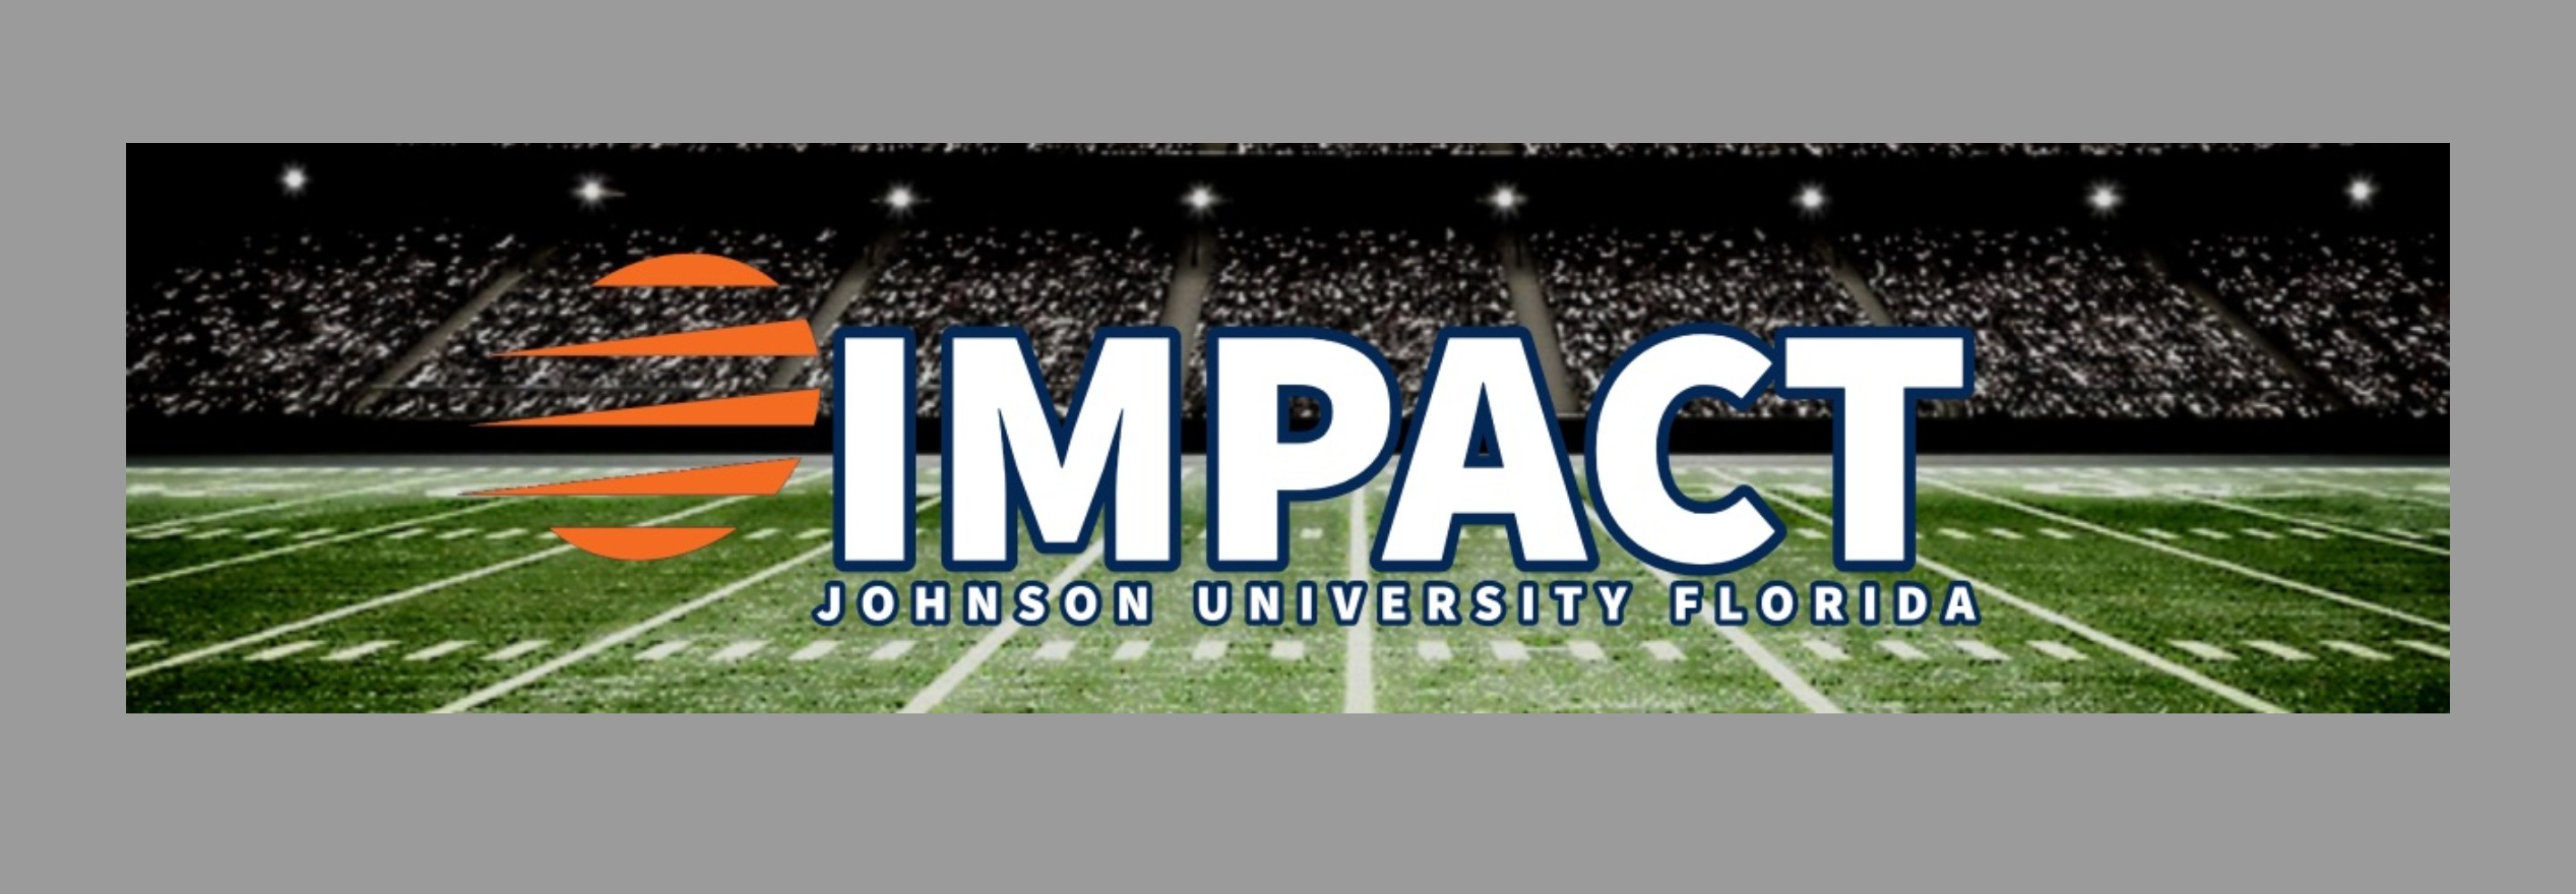 IMPACT event for high schoolers at Johnson University Florida